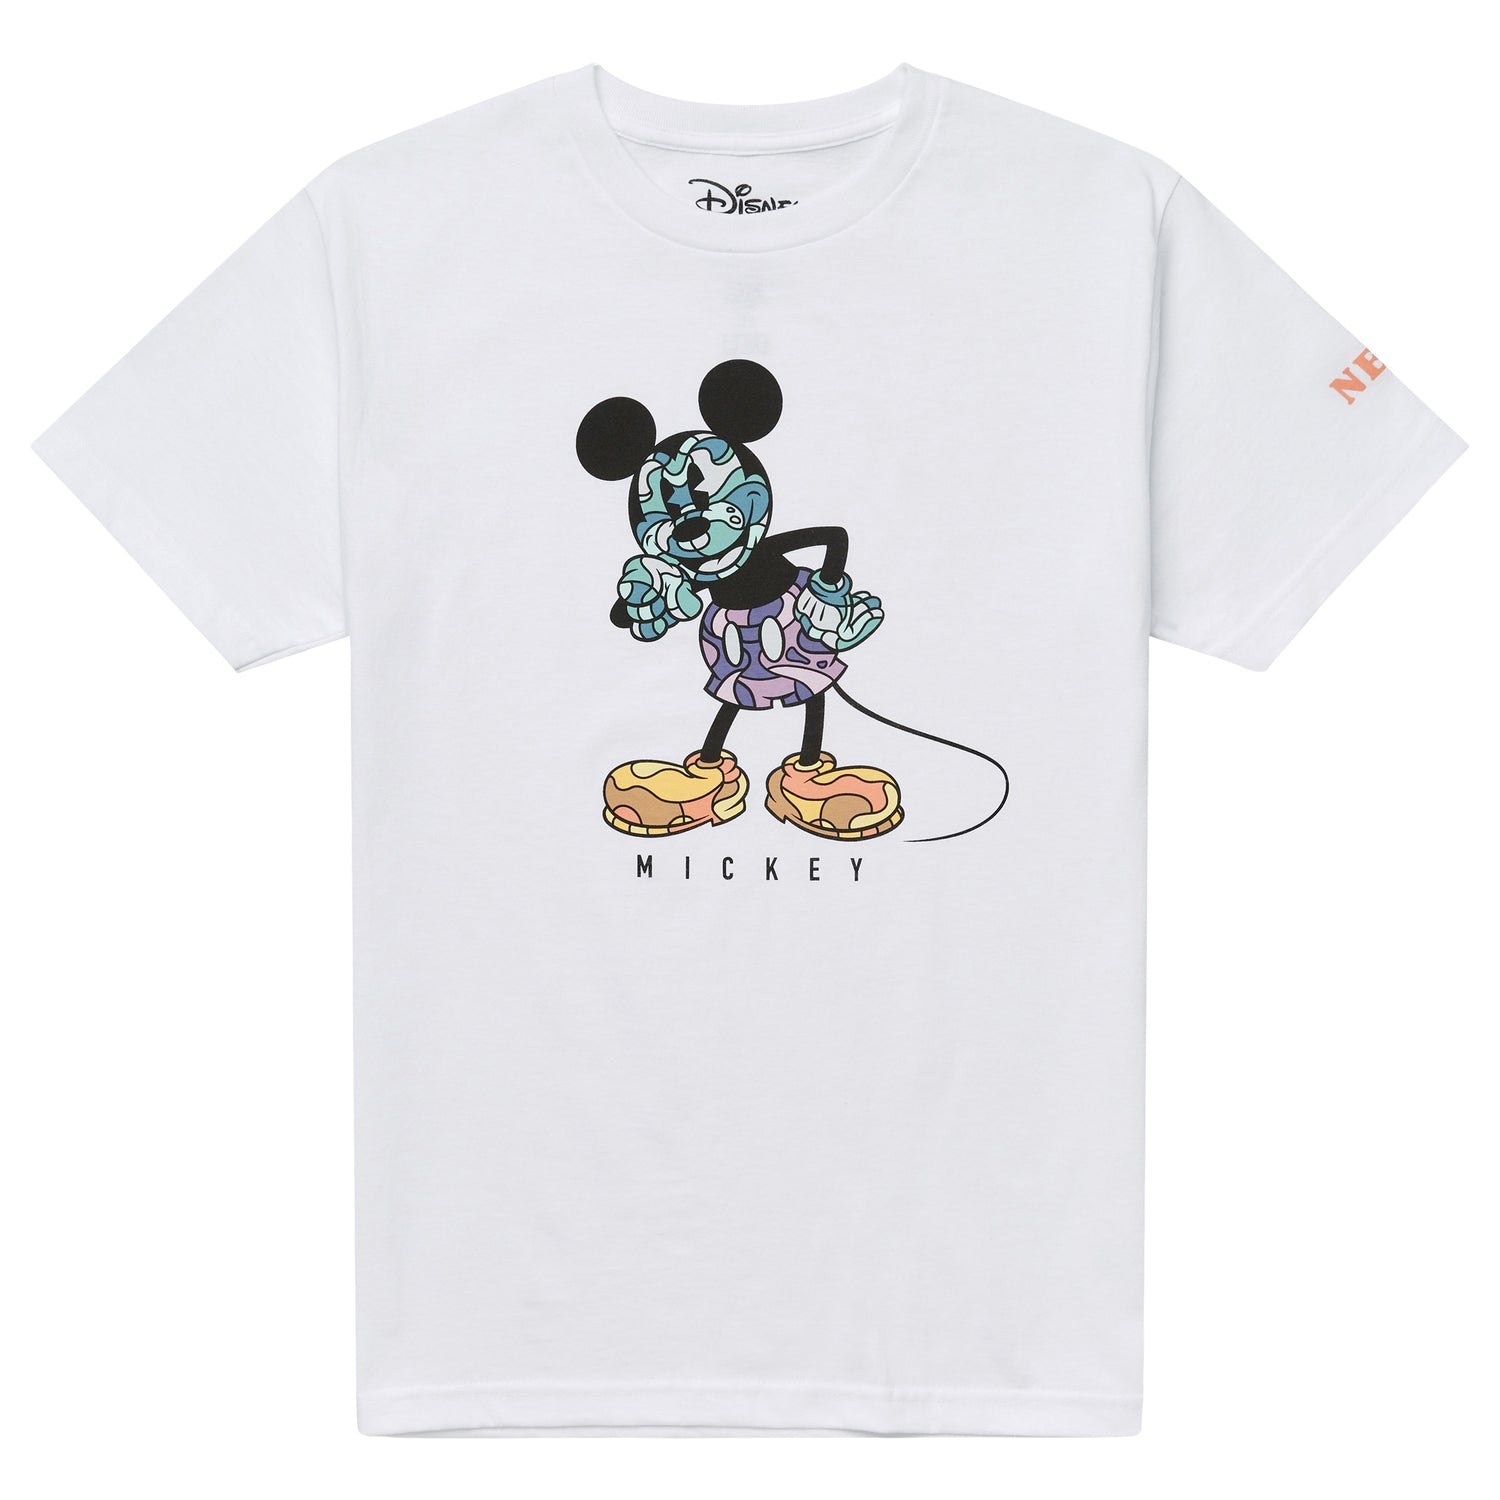 MICKEY MOUSE FRACTAL TEE - WHITE